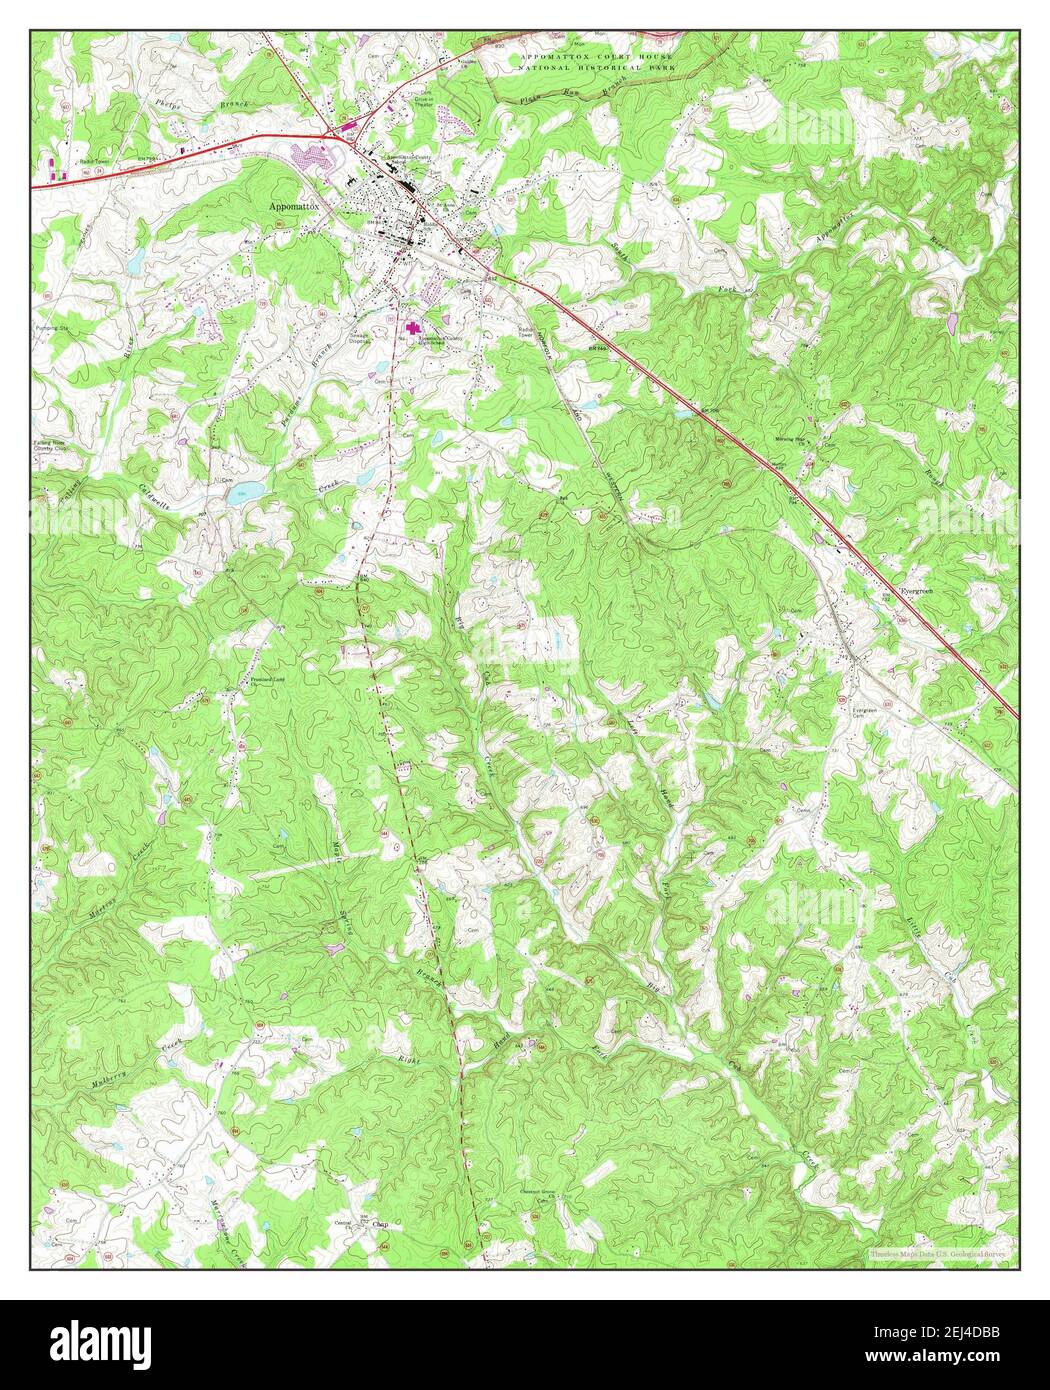 Appomattox, Virginia, map 1968, 1:24000, United States of America by Timeless Maps, data U.S. Geological Survey Stock Photo